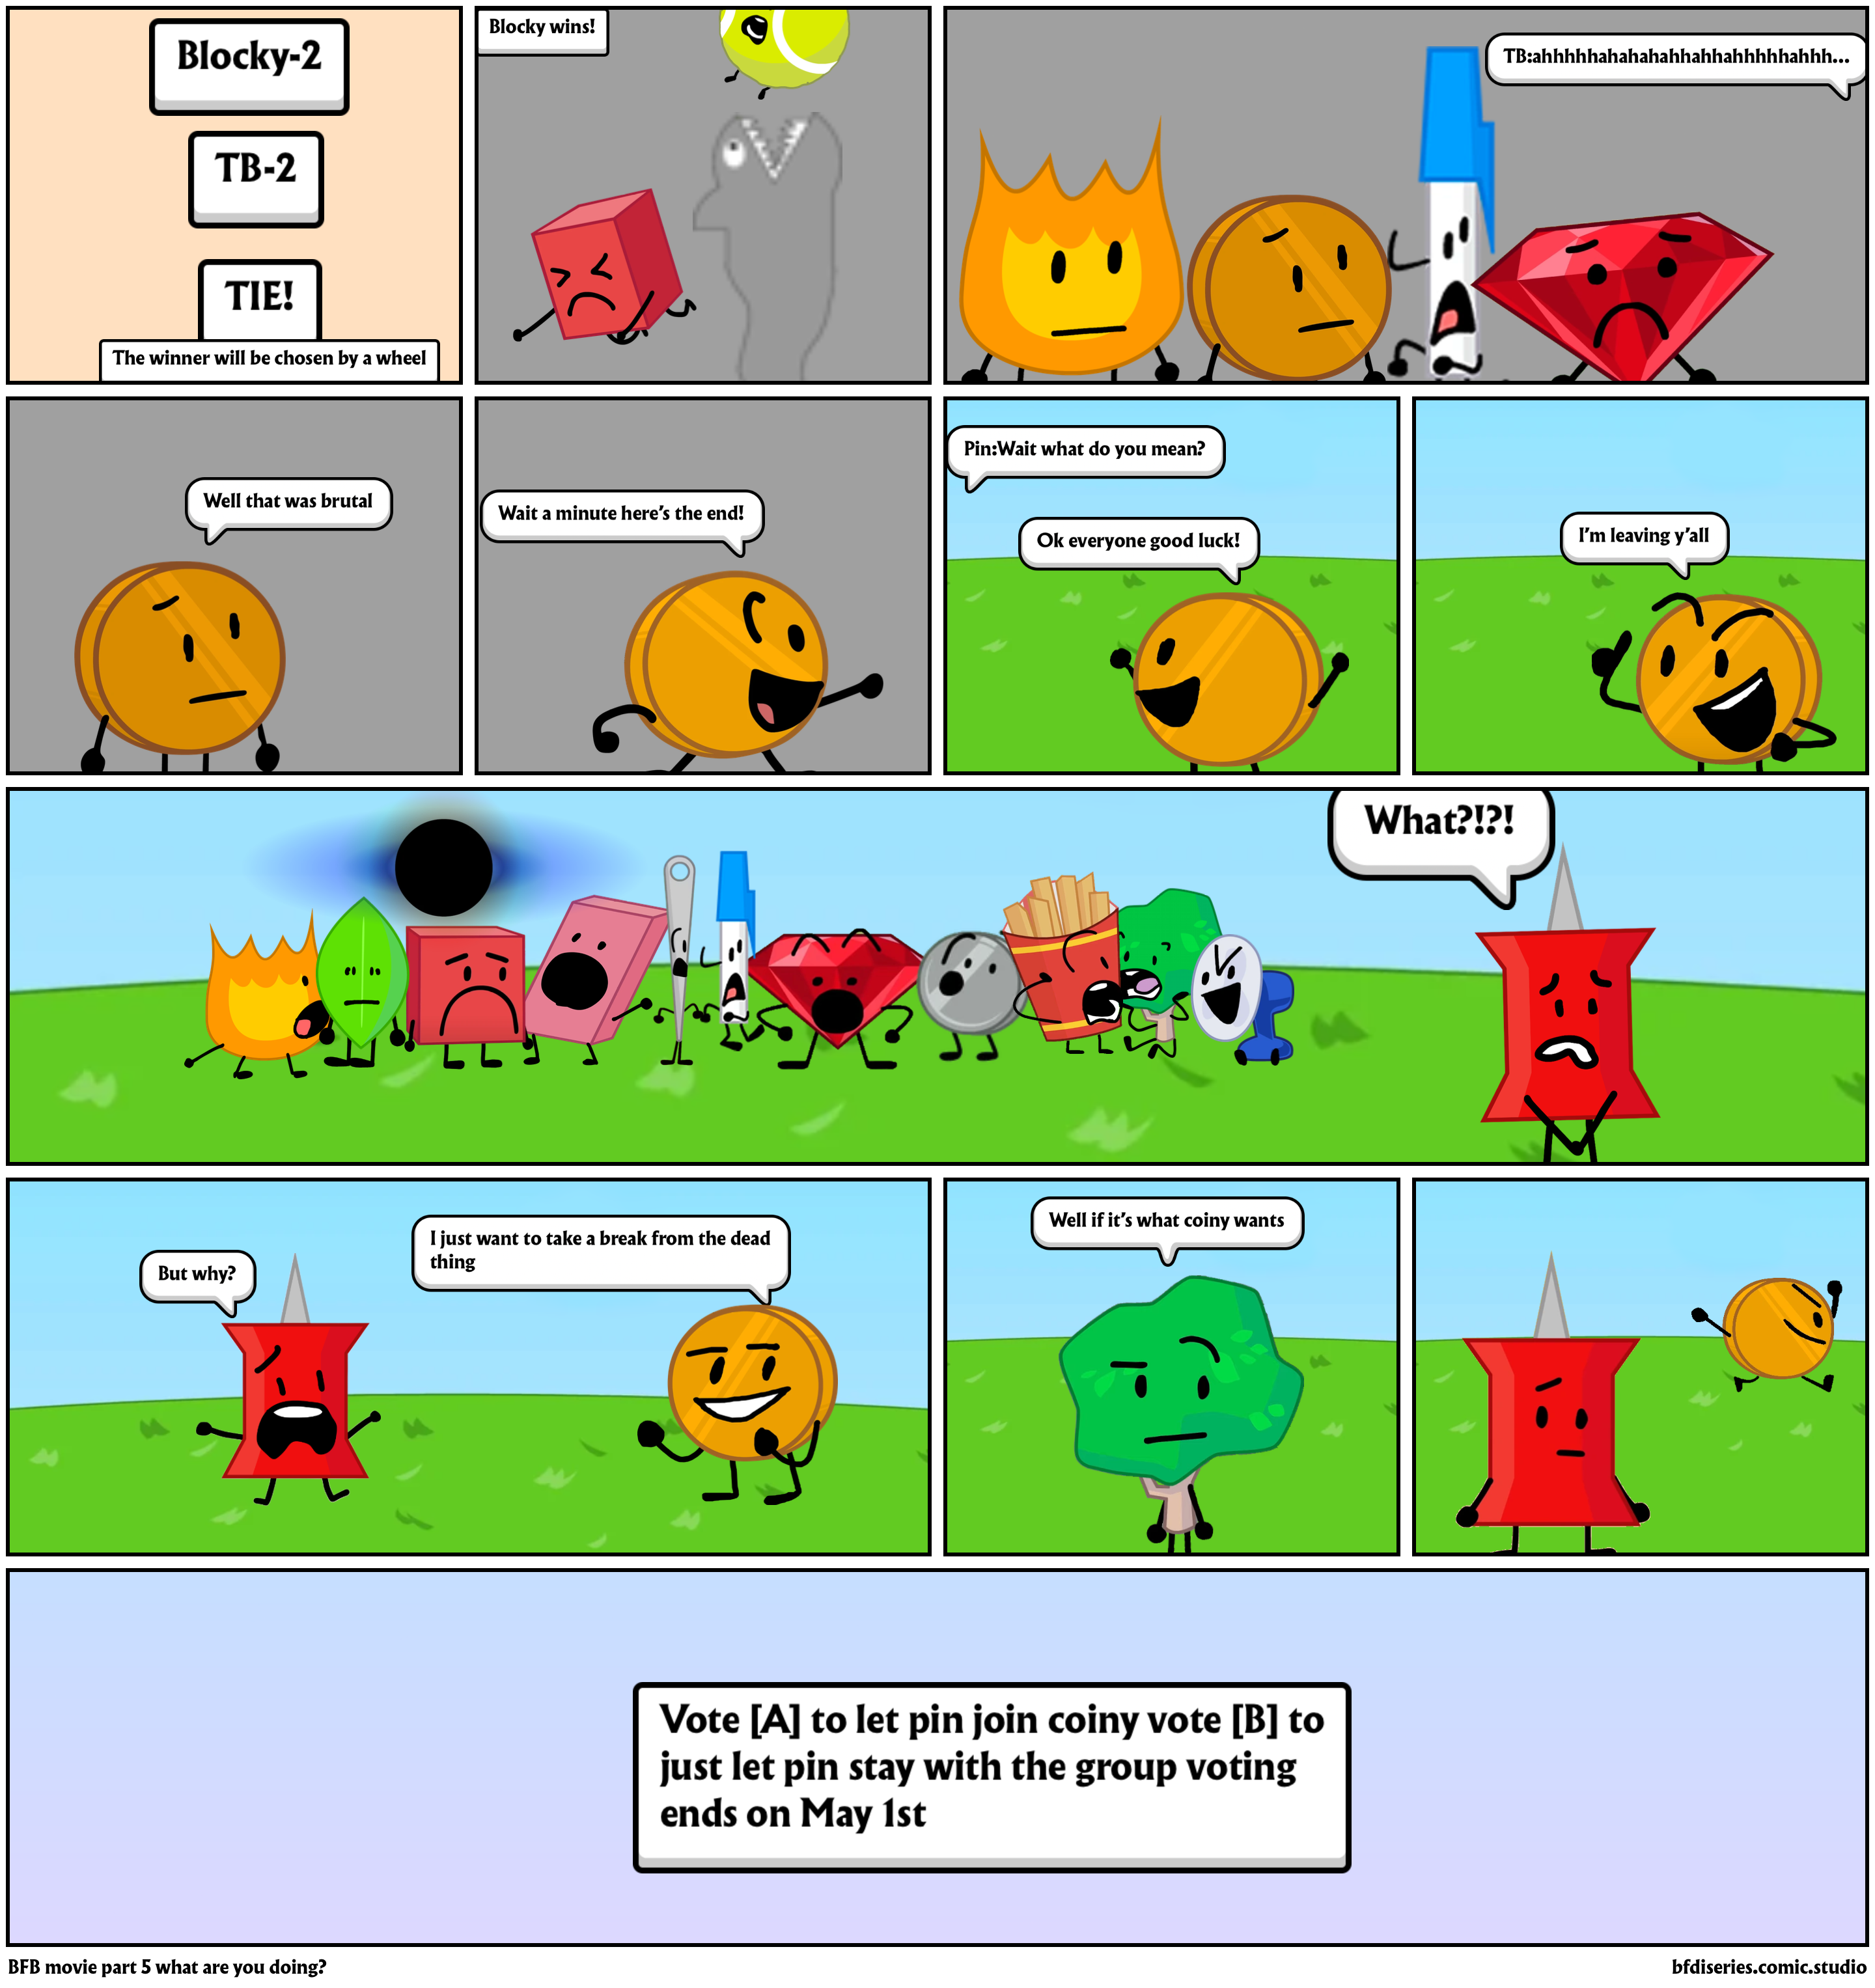 BFB movie part 5 what are you doing?